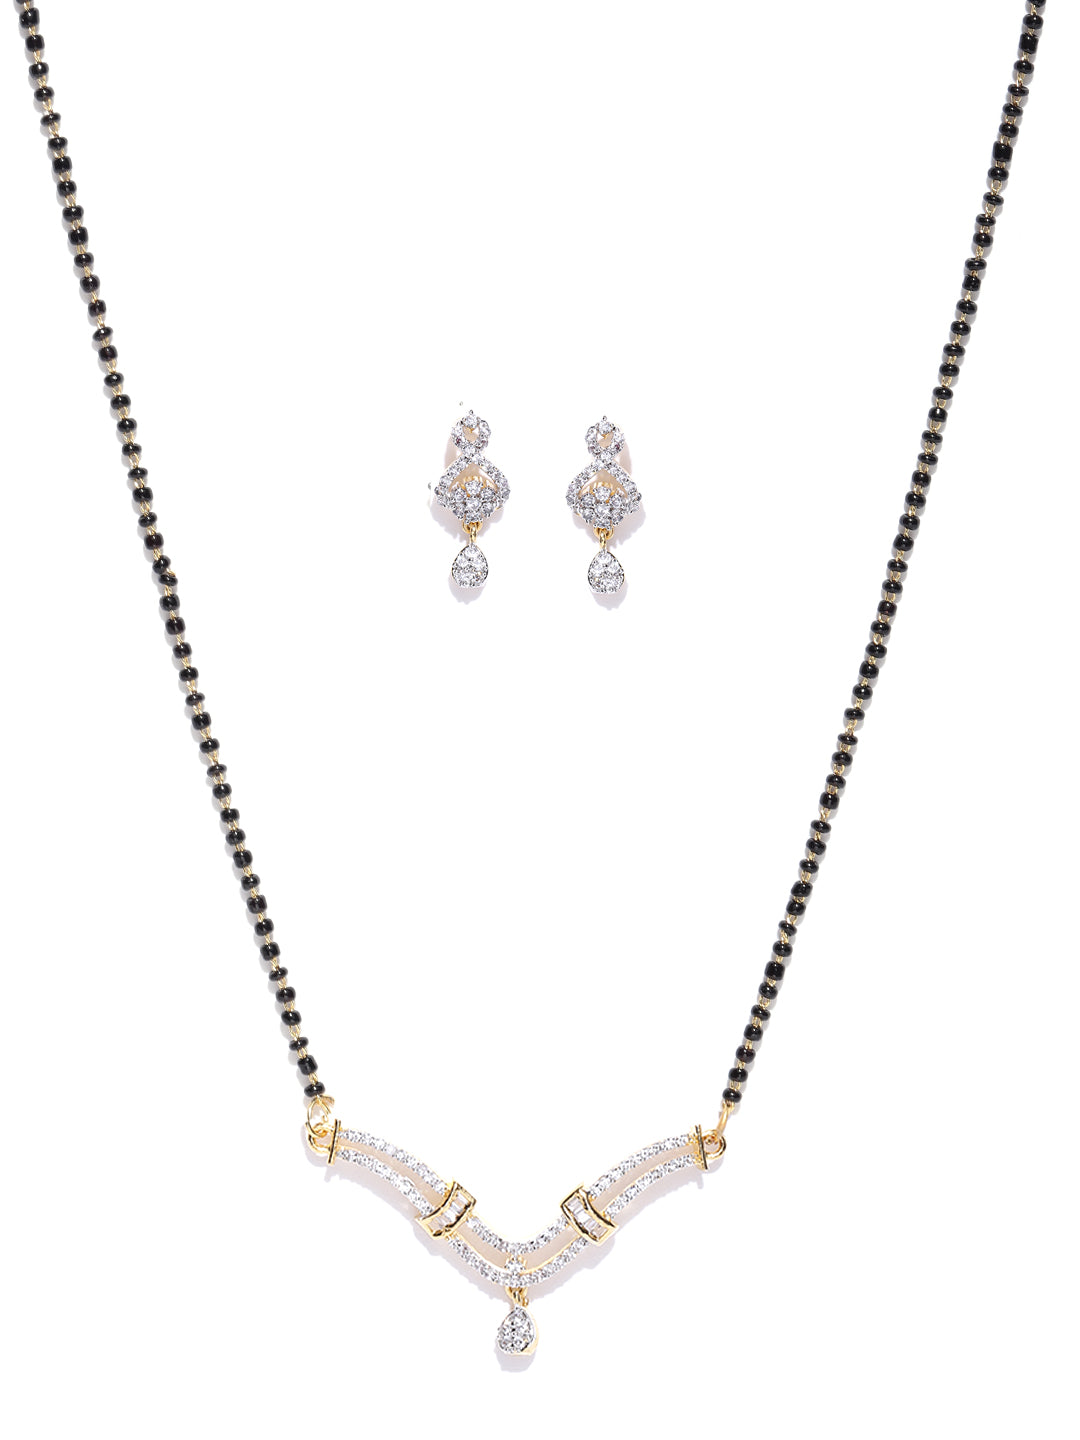 Dual-Toned AD Studded Dual Layer Curved V Shaped Mangalsutra Set